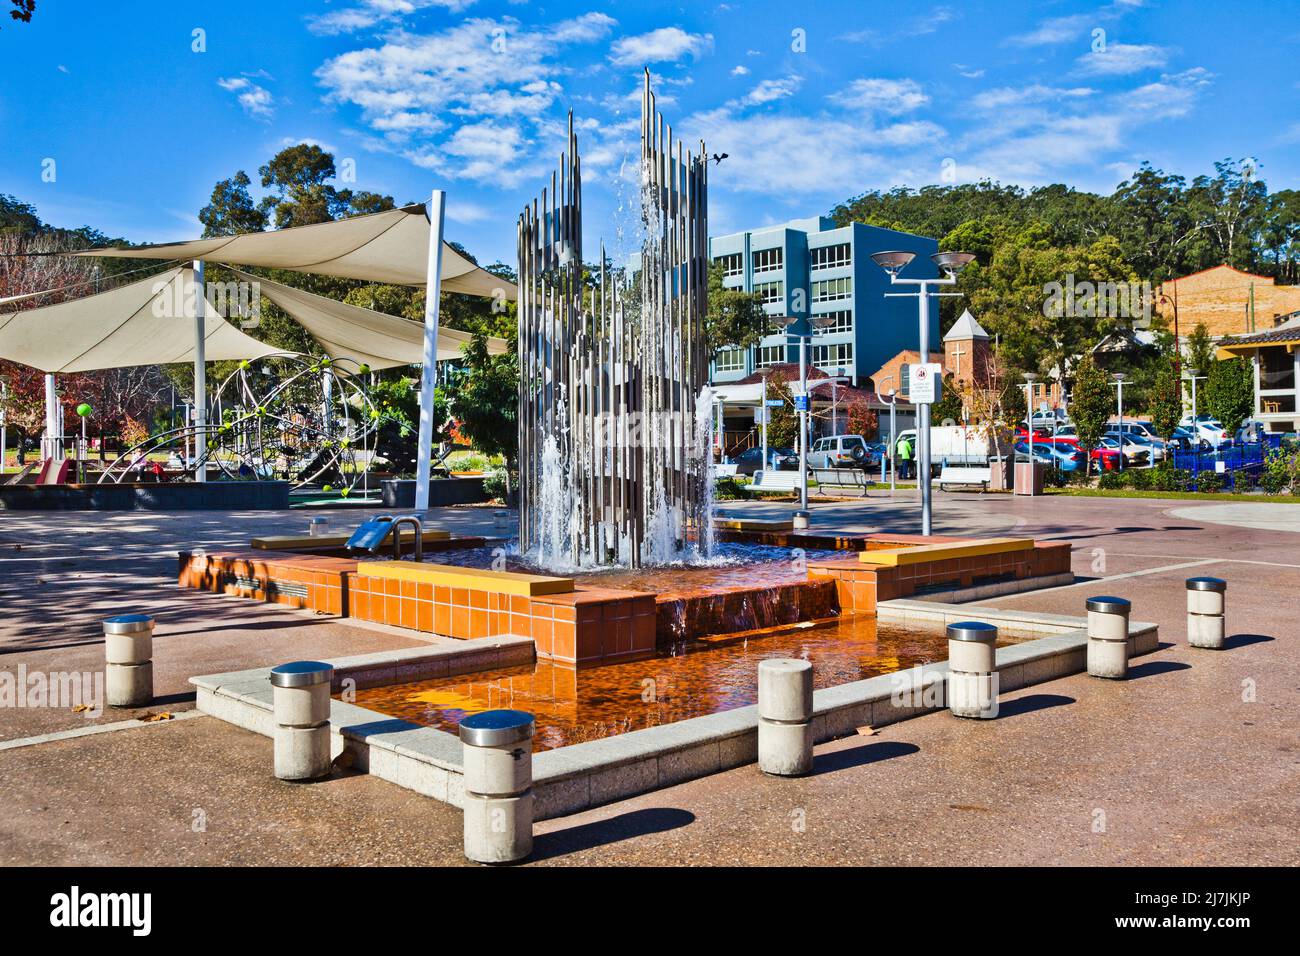 Australia, New South Wales, Central Coast, Gosford, view of Kibble Park in the heart of Godford City Stock Photo